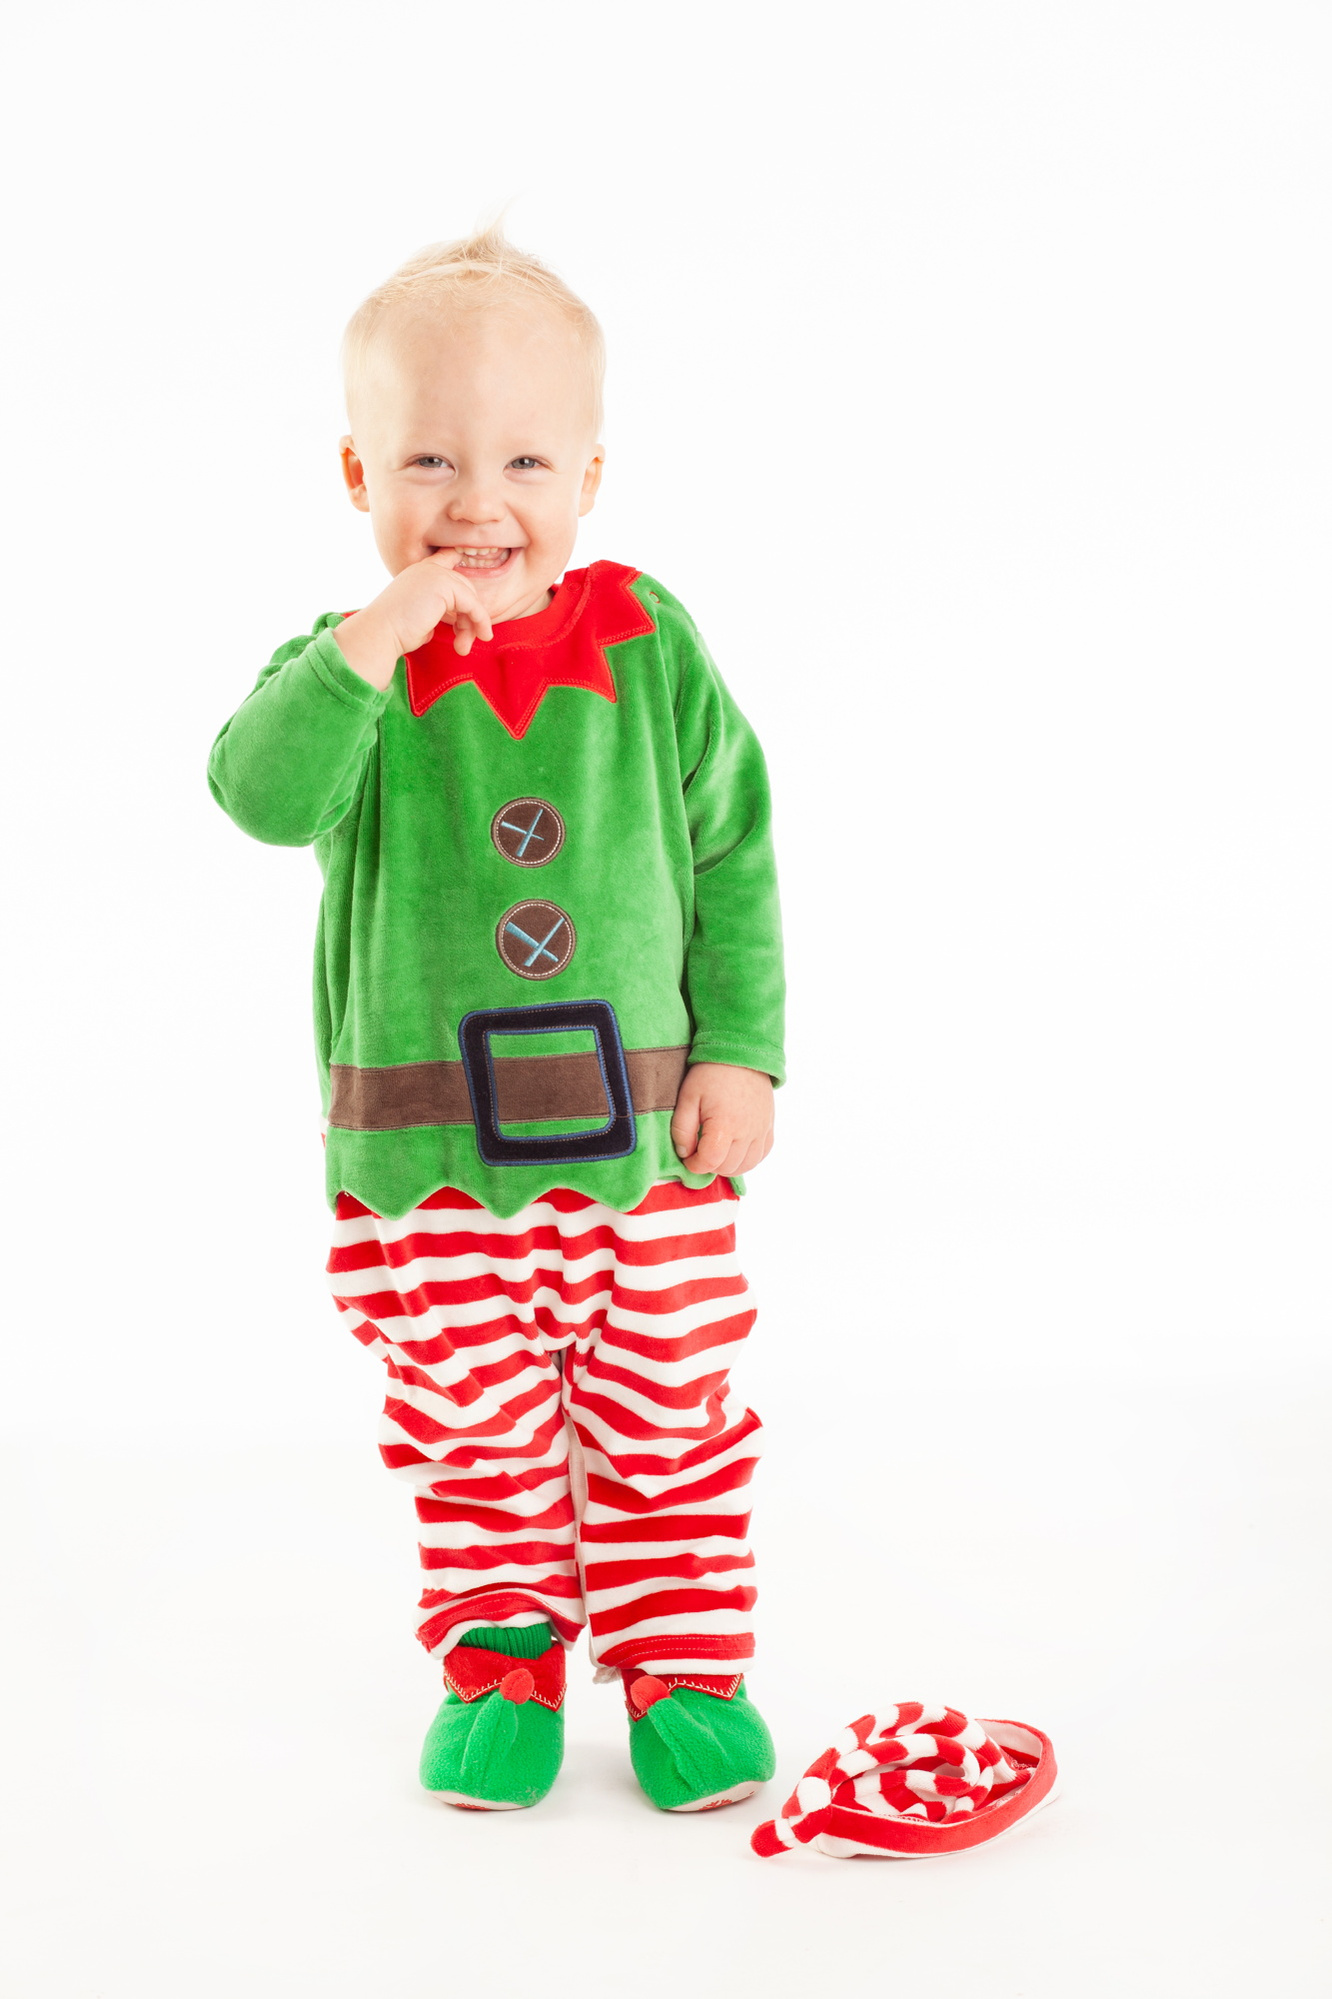 Christmas portrait of a young blonde boy in elf costume in a professional family portrait photography studio with white background